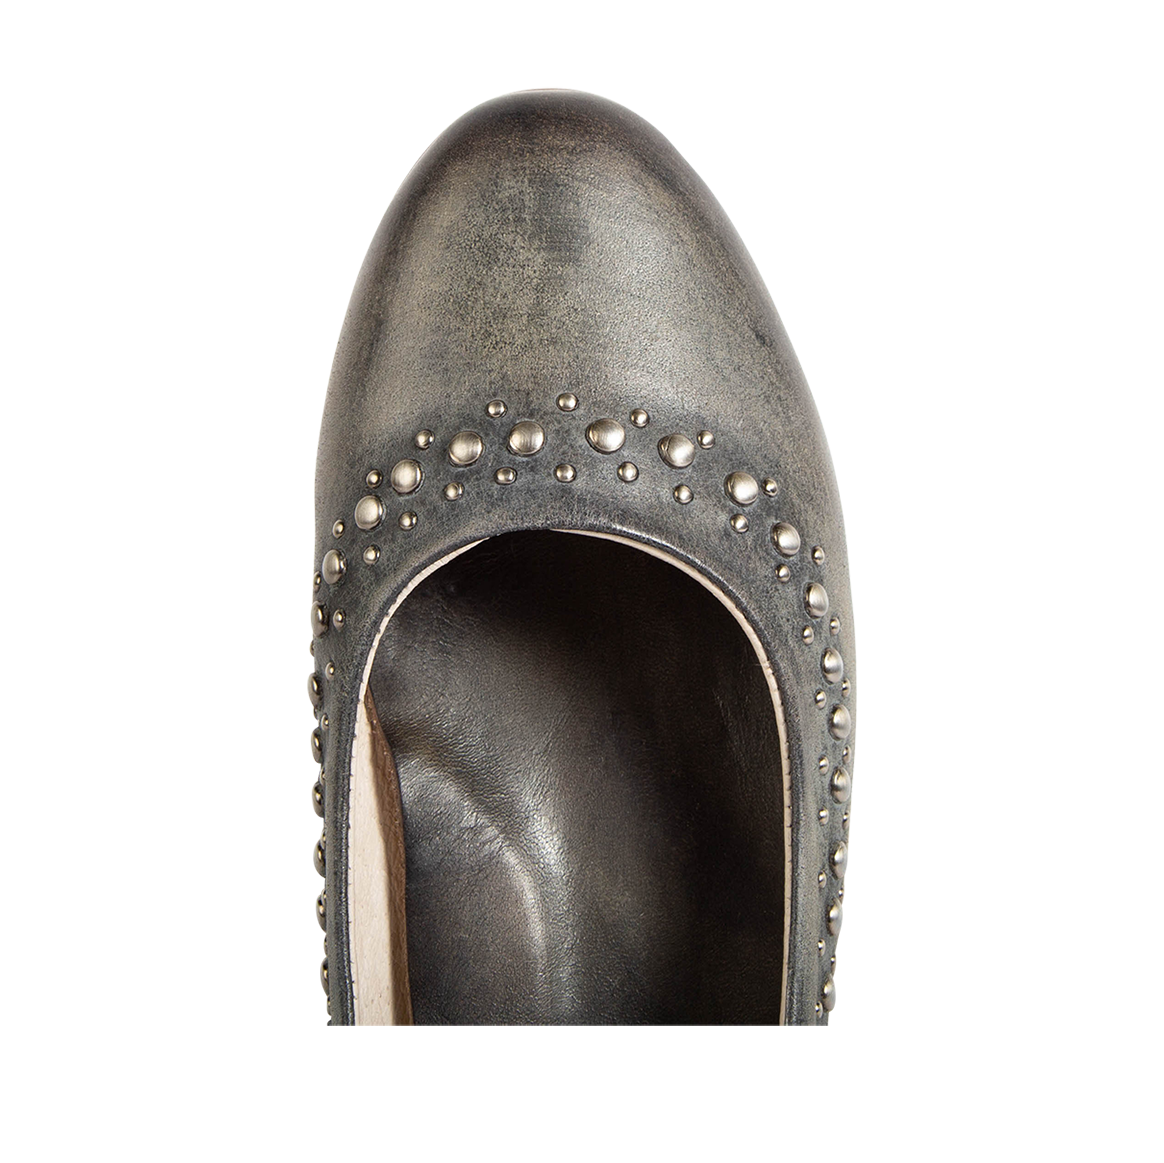 Top view showing round toe on FREEBIRD women's Blossom olive multi ballet flat slip-on shoe featuring stud detailing a pointed toe